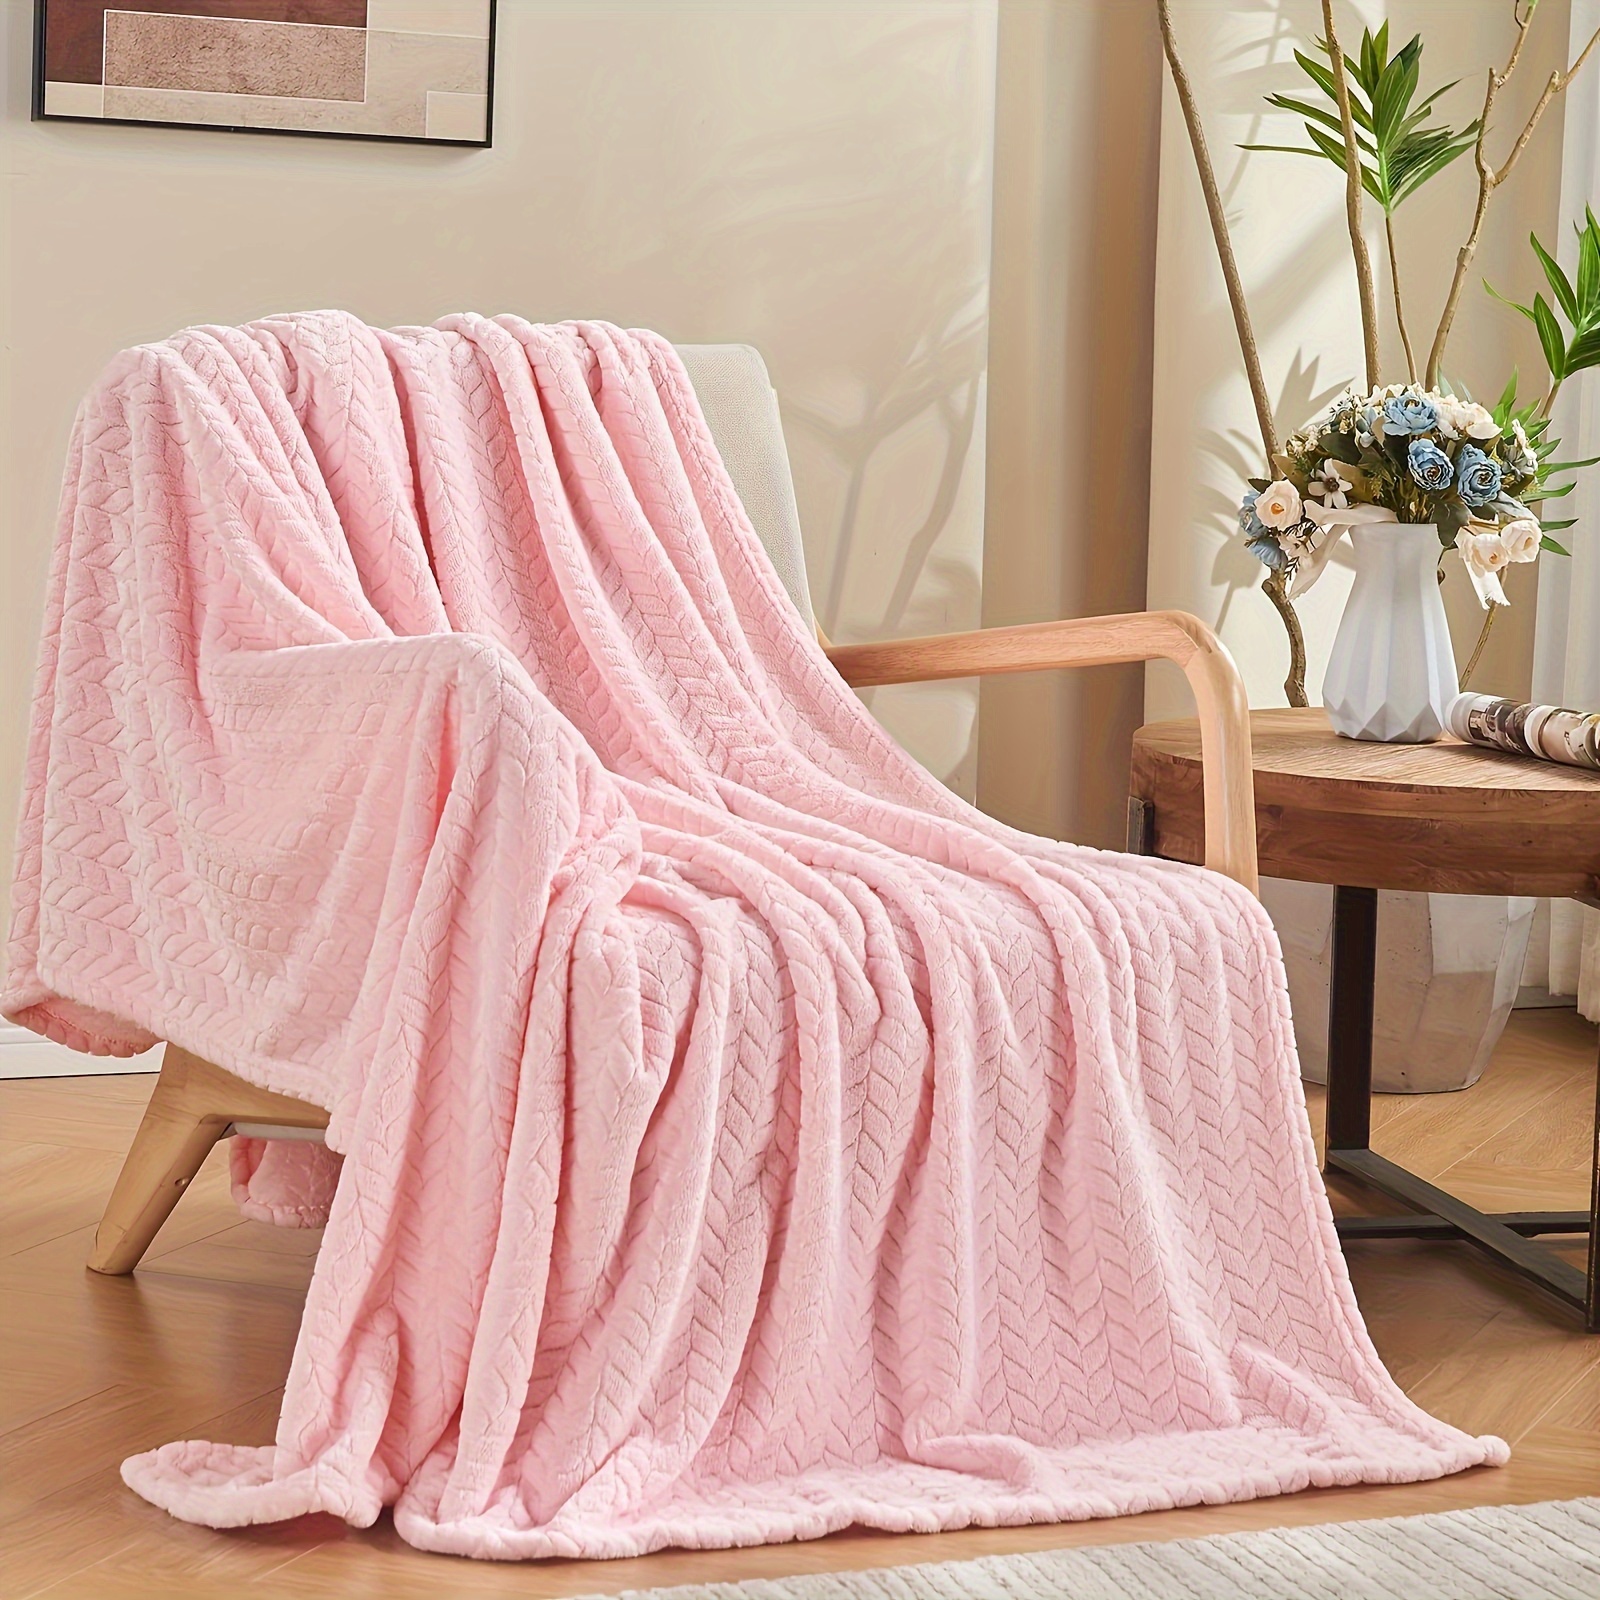 Ackermans - Winter is here and it's time to get cosy. Our coral-fleece  throws are ideal for a snuggle, an afternoon snooze on the couch, or  keeping warm while watching a movie.